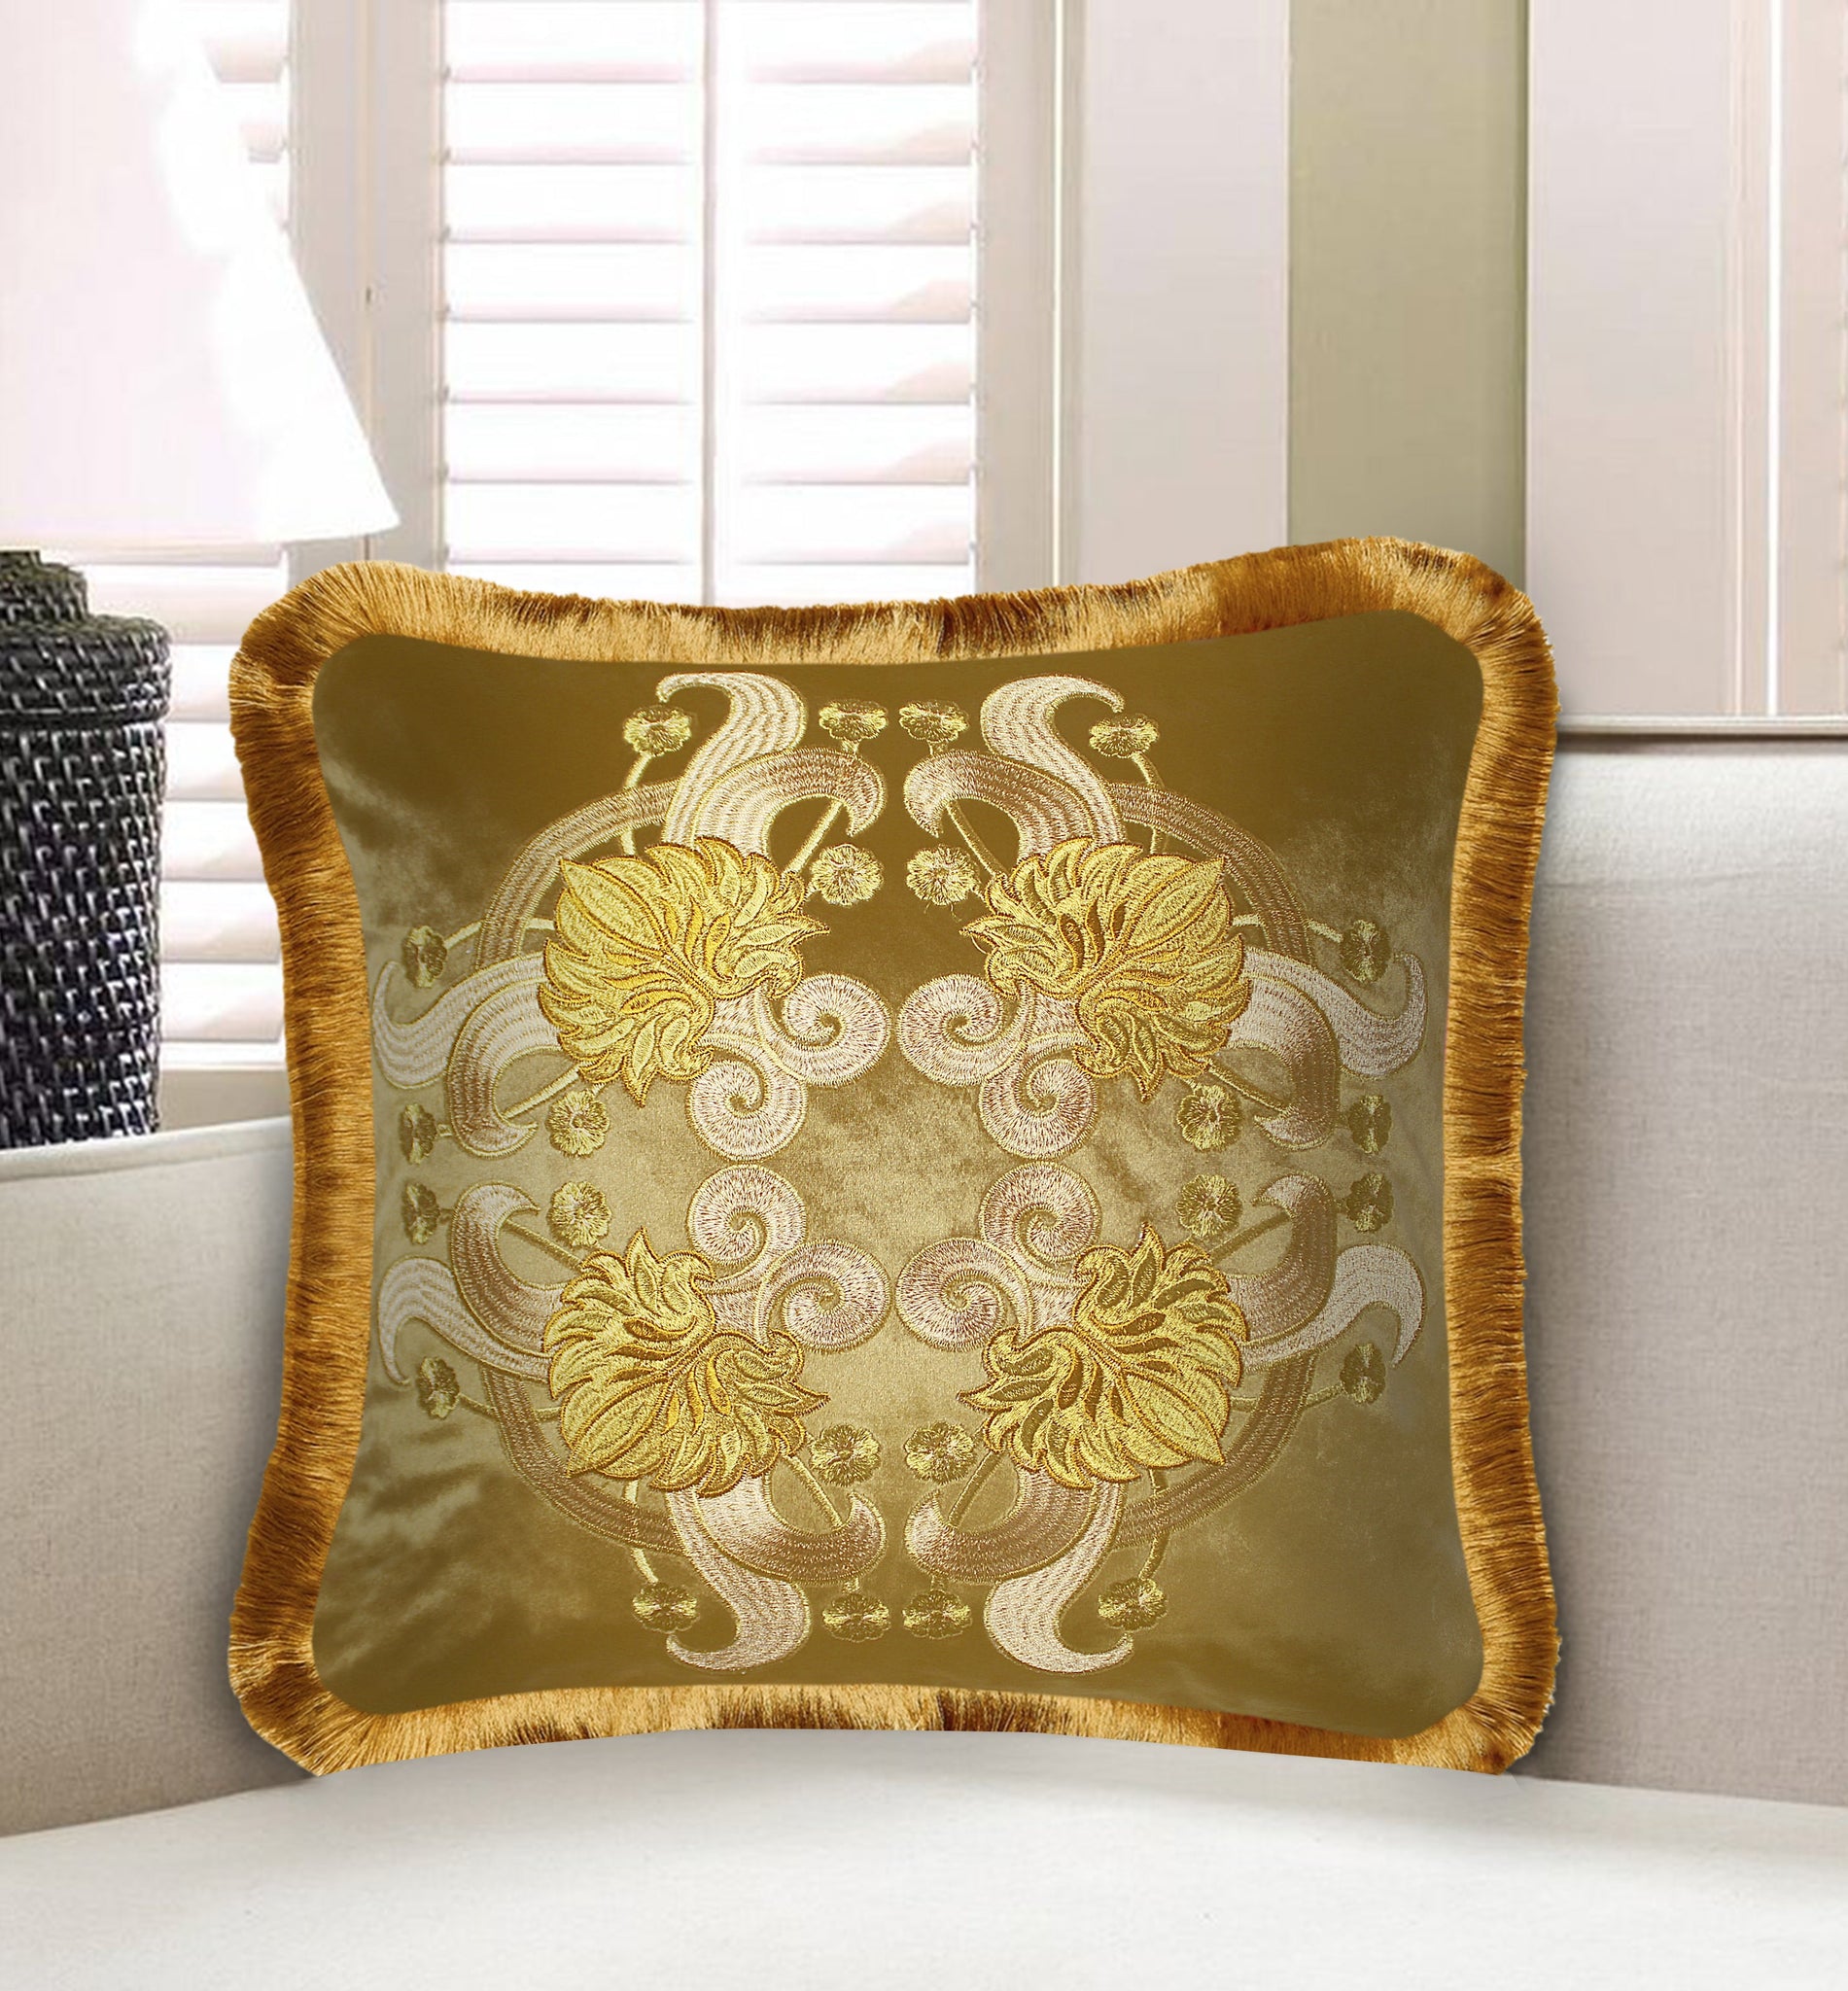 Gold Luxury Embroidered Cushion Covers Velvet Tassels Pillow Case Home Decorative European Sofa Car Throw Pillows Gold